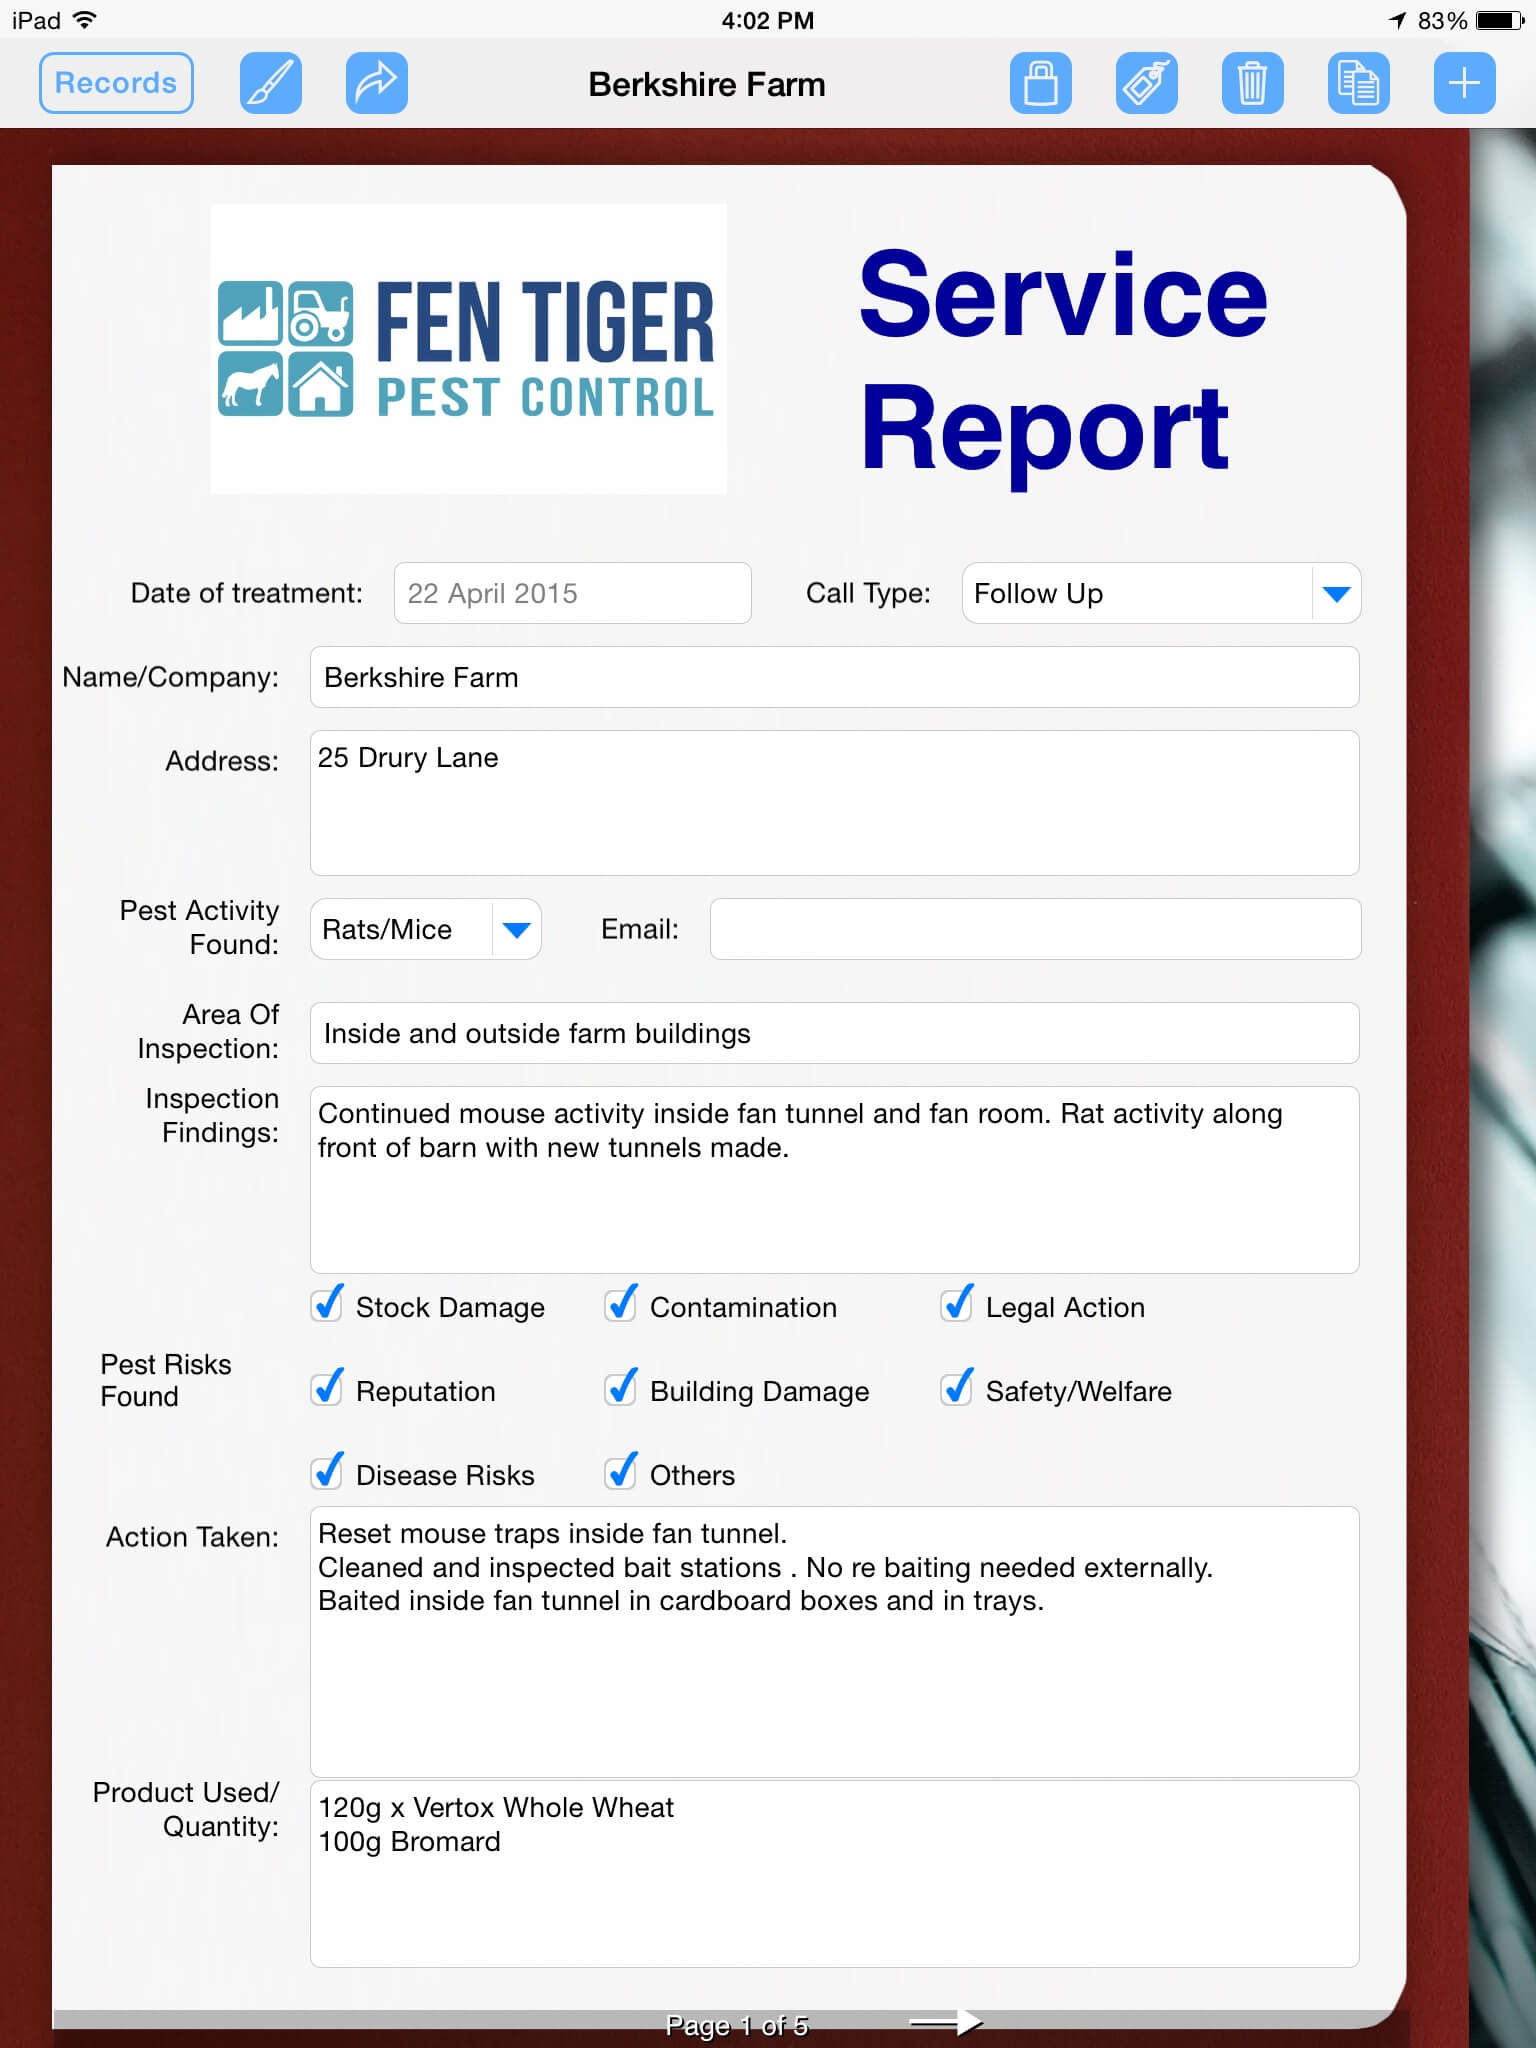 Pest Control Uses Ipad To Prepare Service Report | Form With Pest Control Inspection Report Template